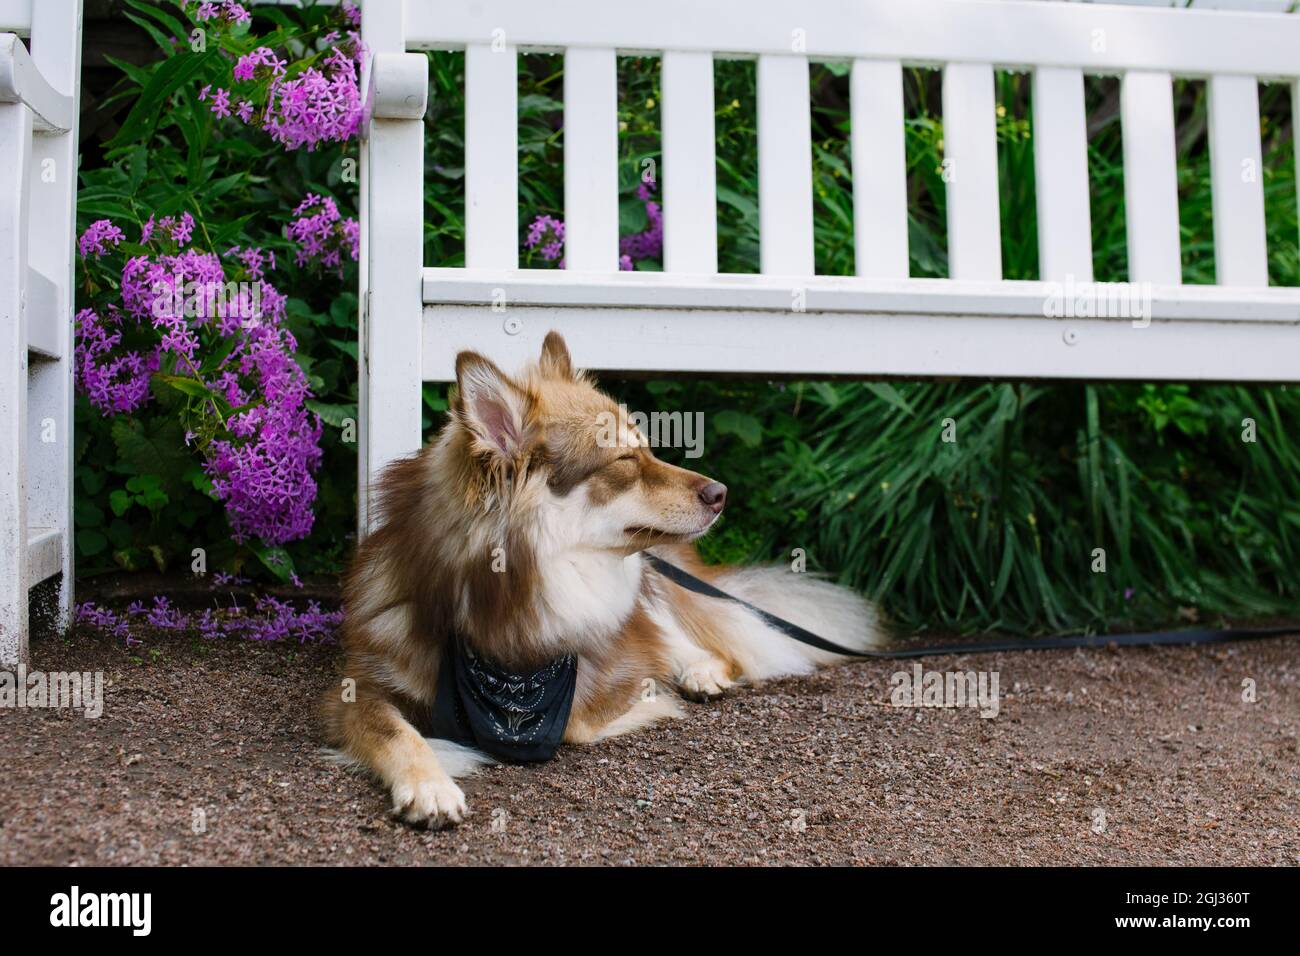 Dog lying on the ground next to a white garden bench. Flowers in the background. Finnish lapphund. Stock Photo